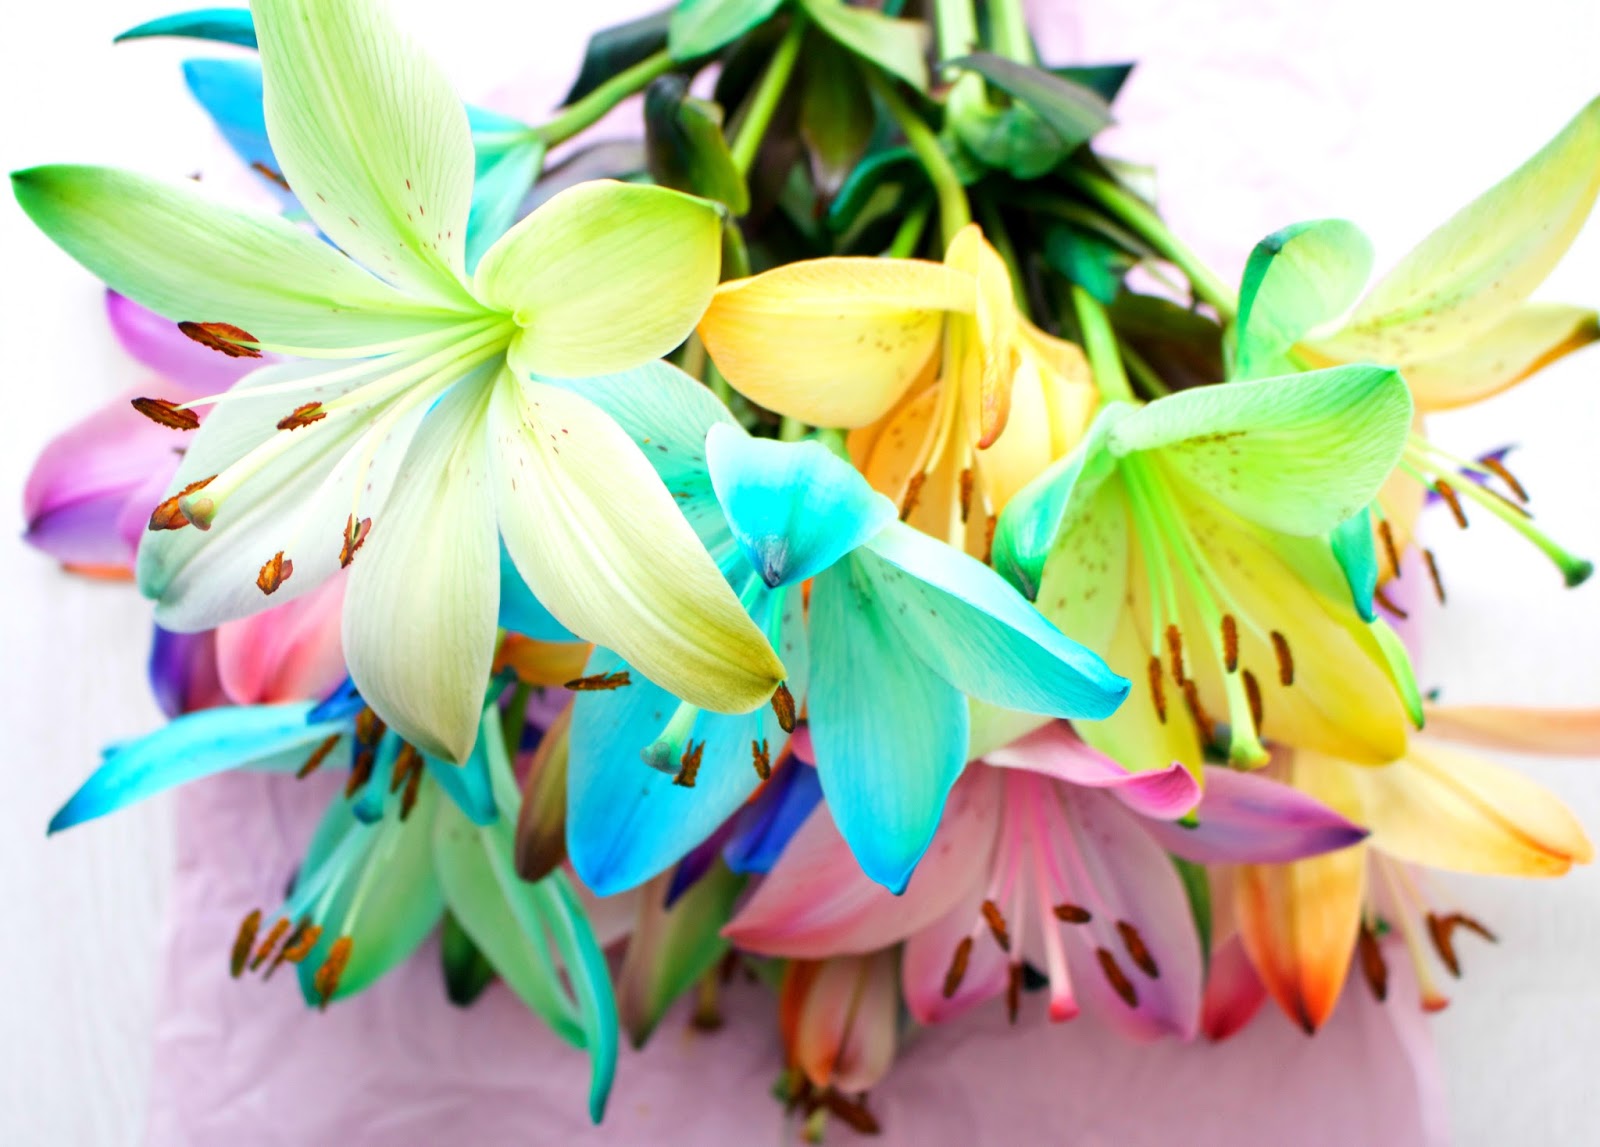 Rainbow Lilies. Blue lilies. Purple lilies. Orange lilies. Green lilies. Multi coloured lilies. spring lilies. spring flowers. Blossoming Gifts flowers. Blossom gifts rainbow lilies. Giveaway, competition. Blog competition. Blog giveaway. Product review. Flower bouquet. 100 Ways to 30, Uk life and style blog, brands, collaboration. Lily pollen.  Canon 700d photos